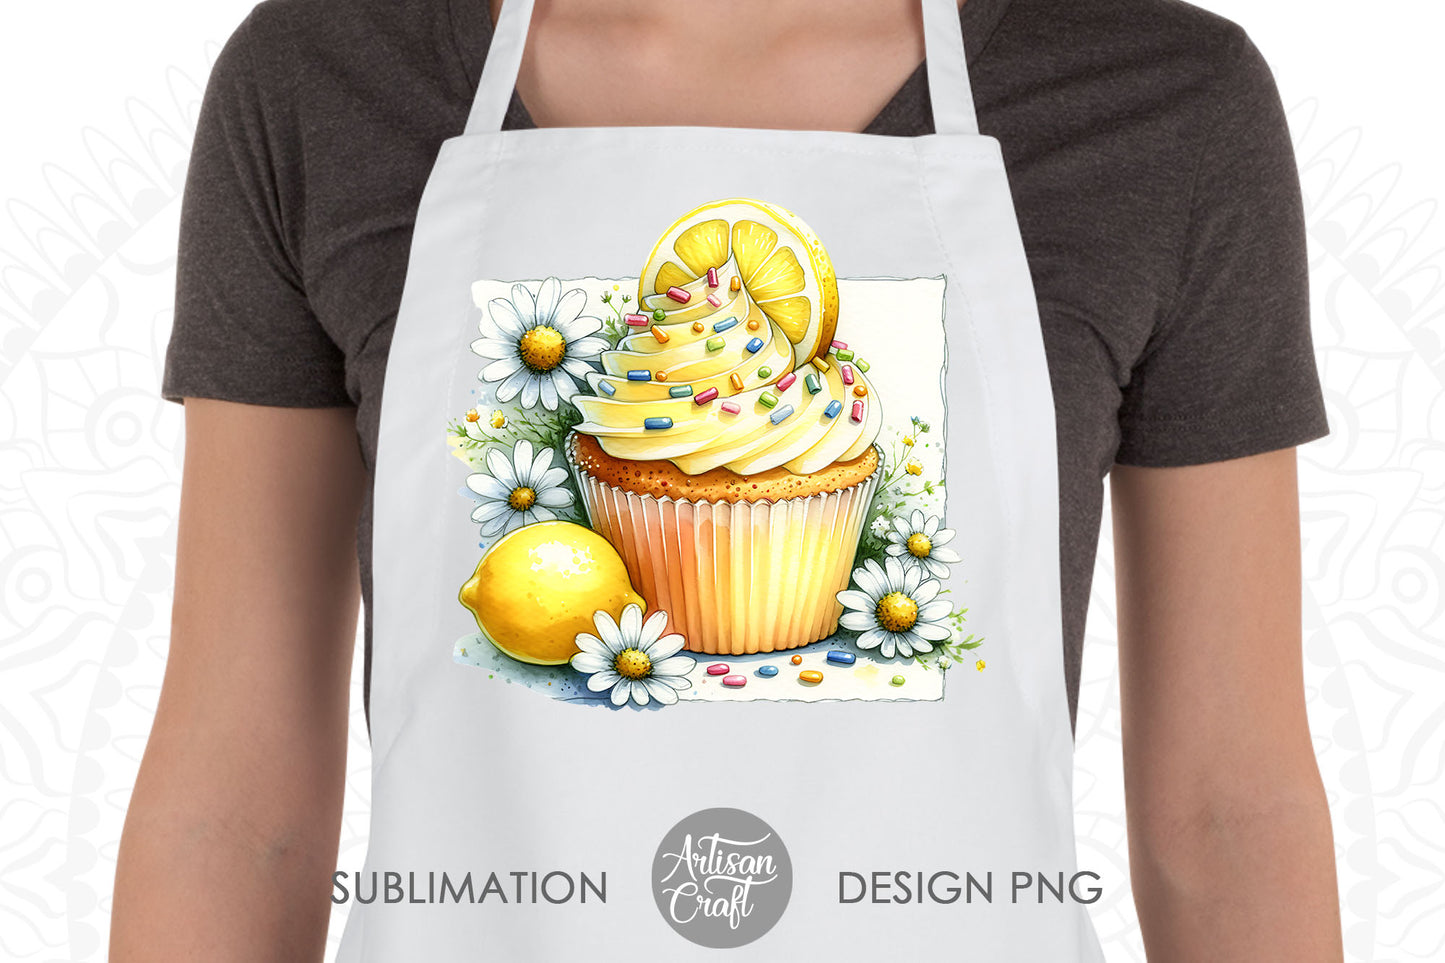 Watercolor cupcake clipart with lemons and daisies, Lemon Clipart, watercolor clipart